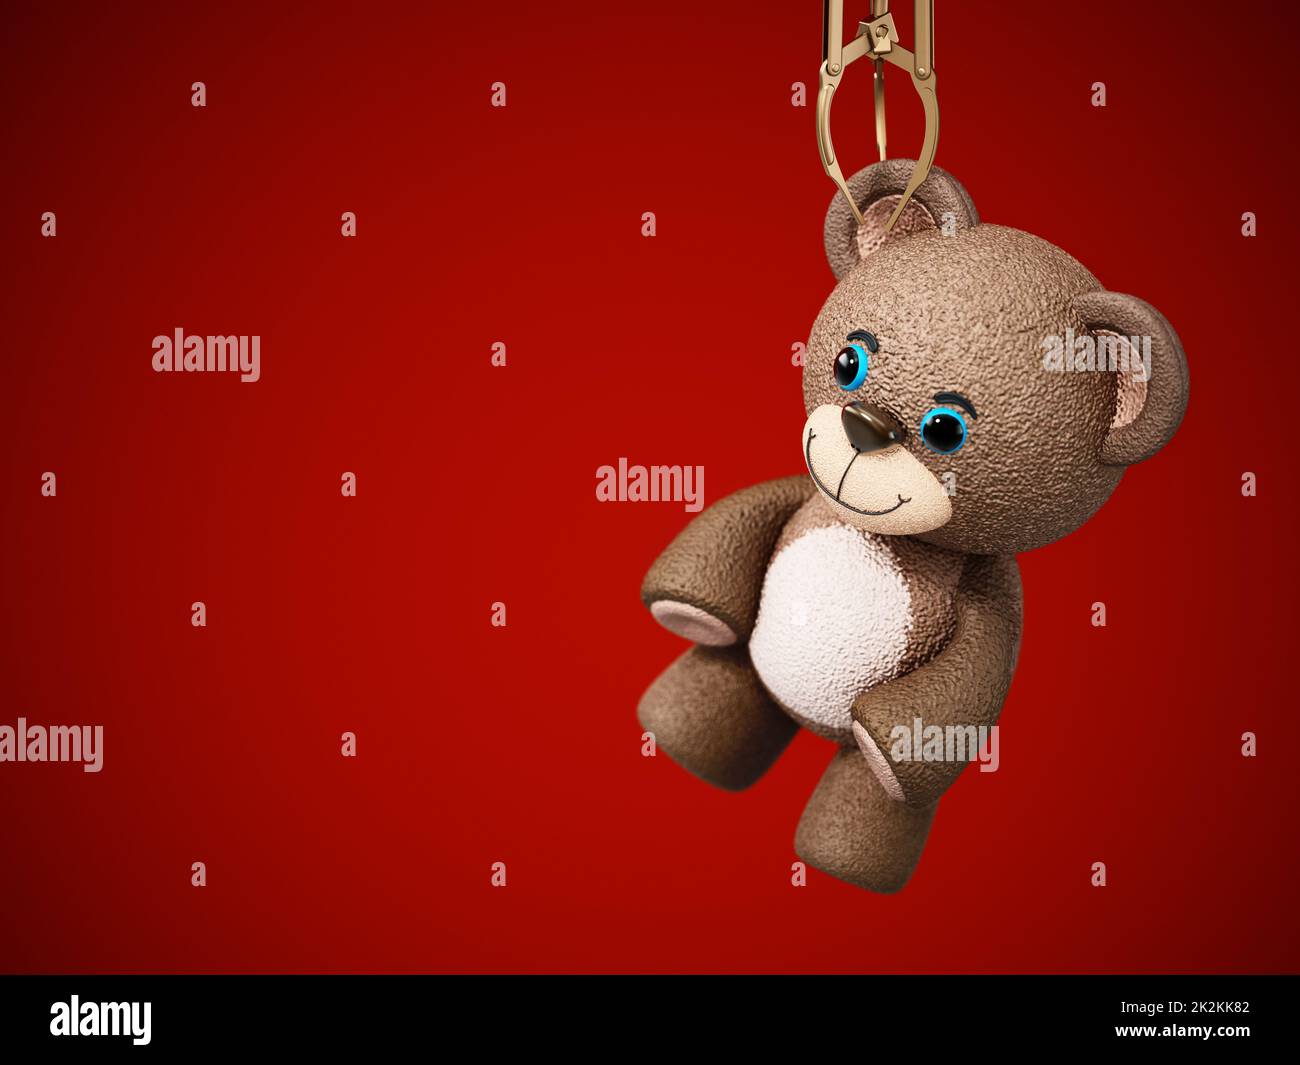 Toy claw machine holding a teddy bear. 3D illustration Stock Photo